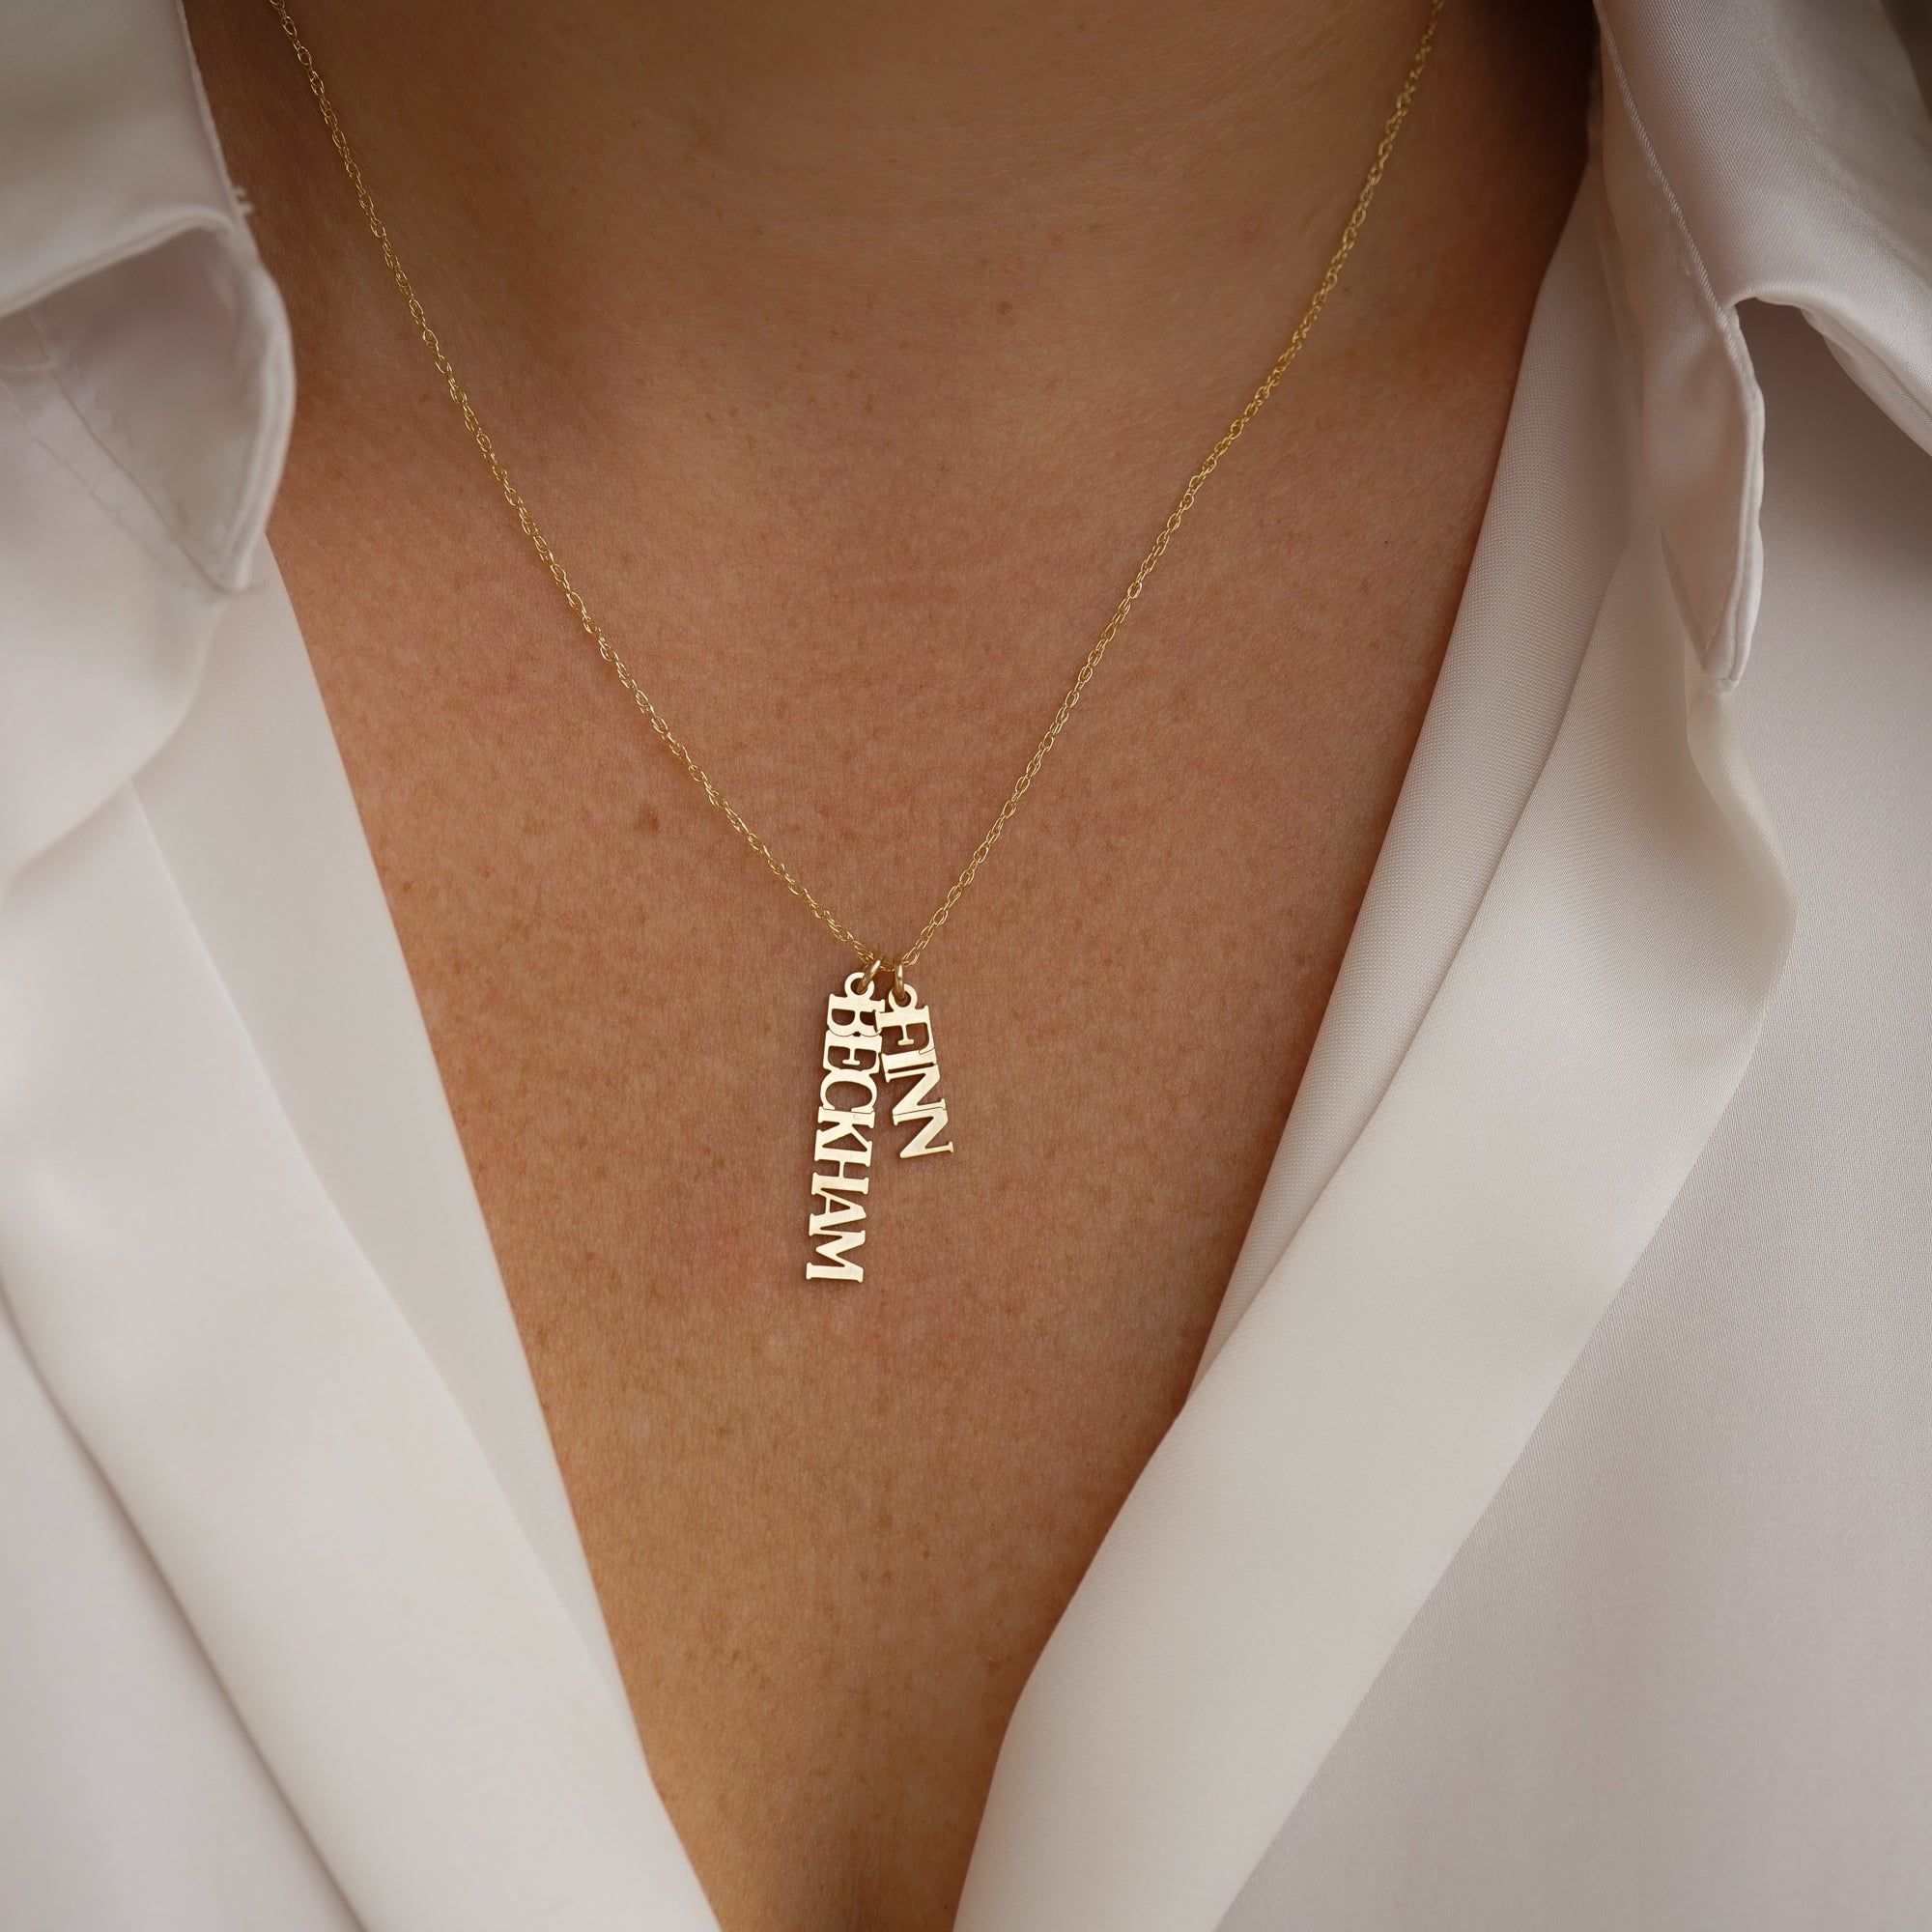 Best choice to express love with name necklaces